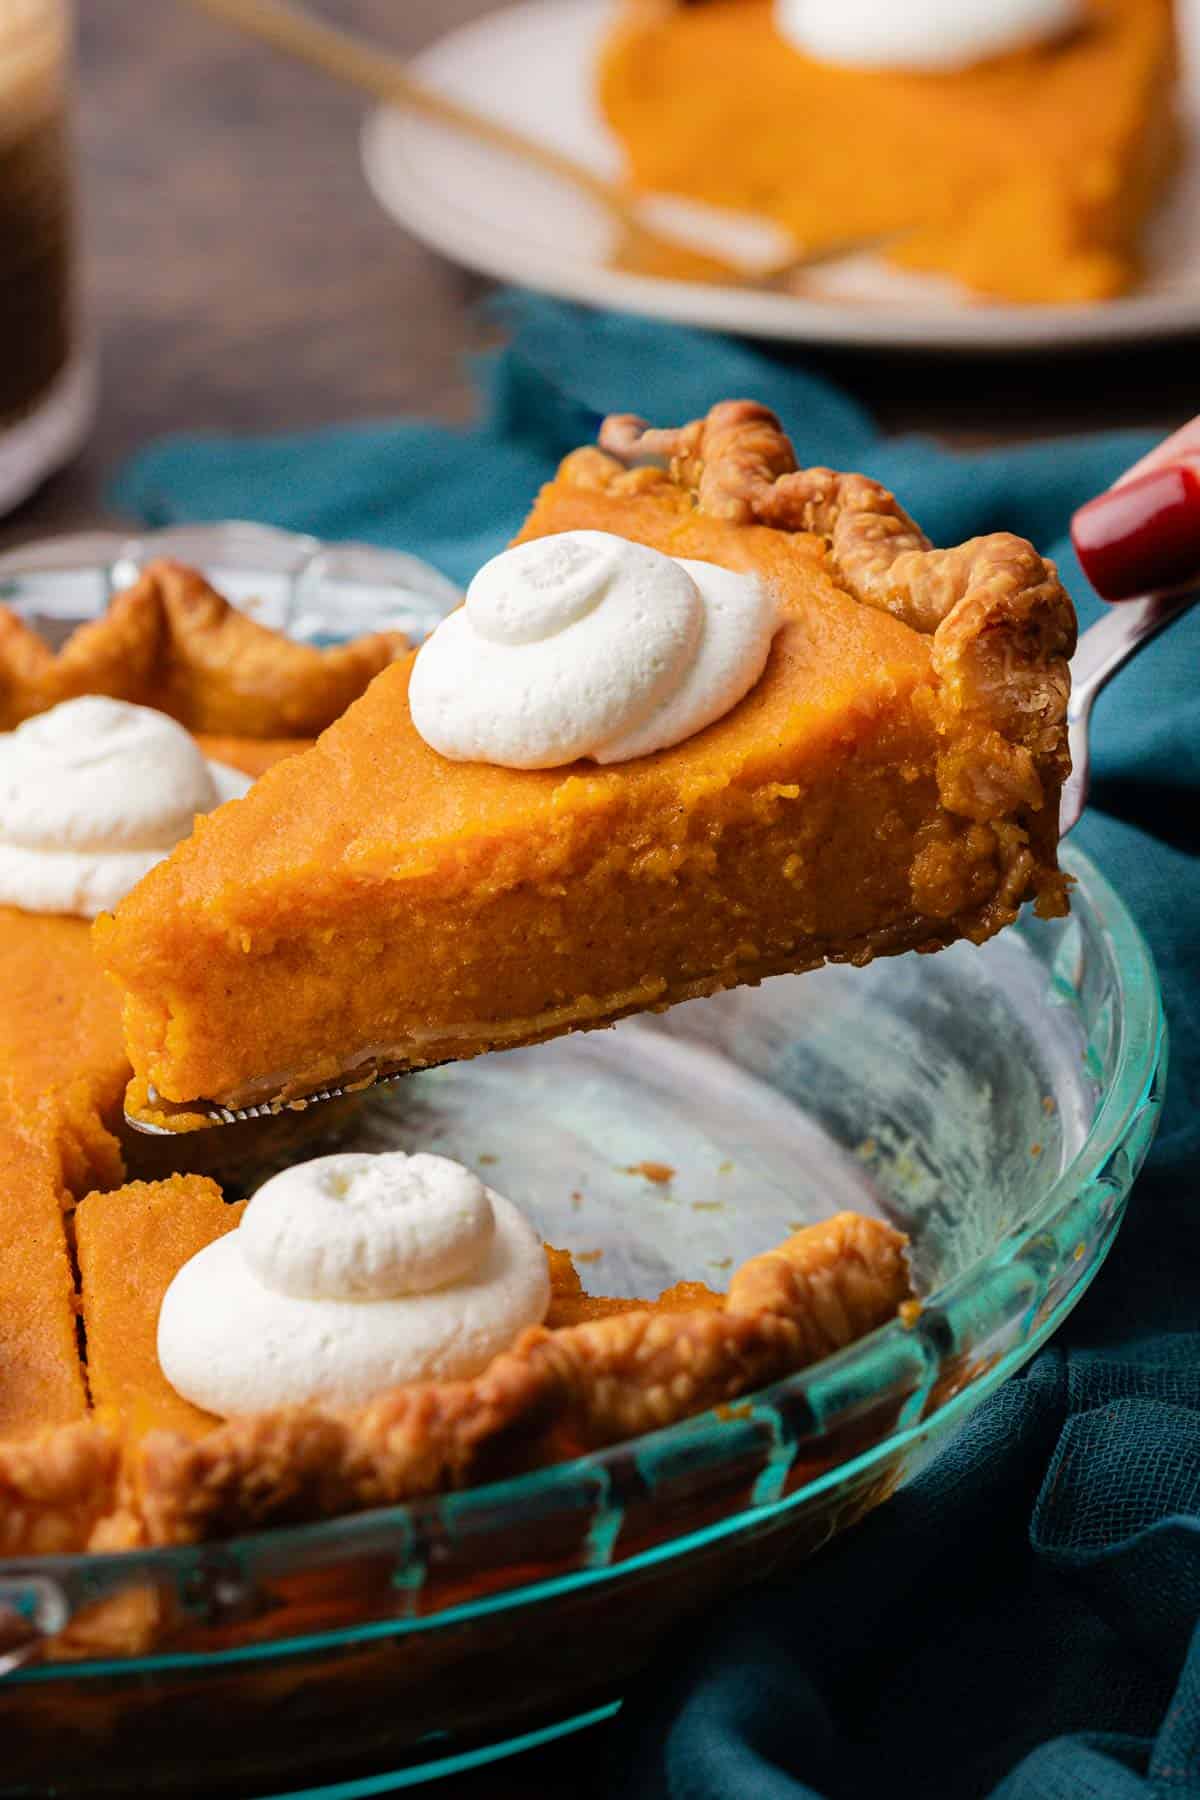 a slice of sweet potato pie being lifted out of a glass pie dish with more slices of pie in it, all topped with dollops of whipped cream